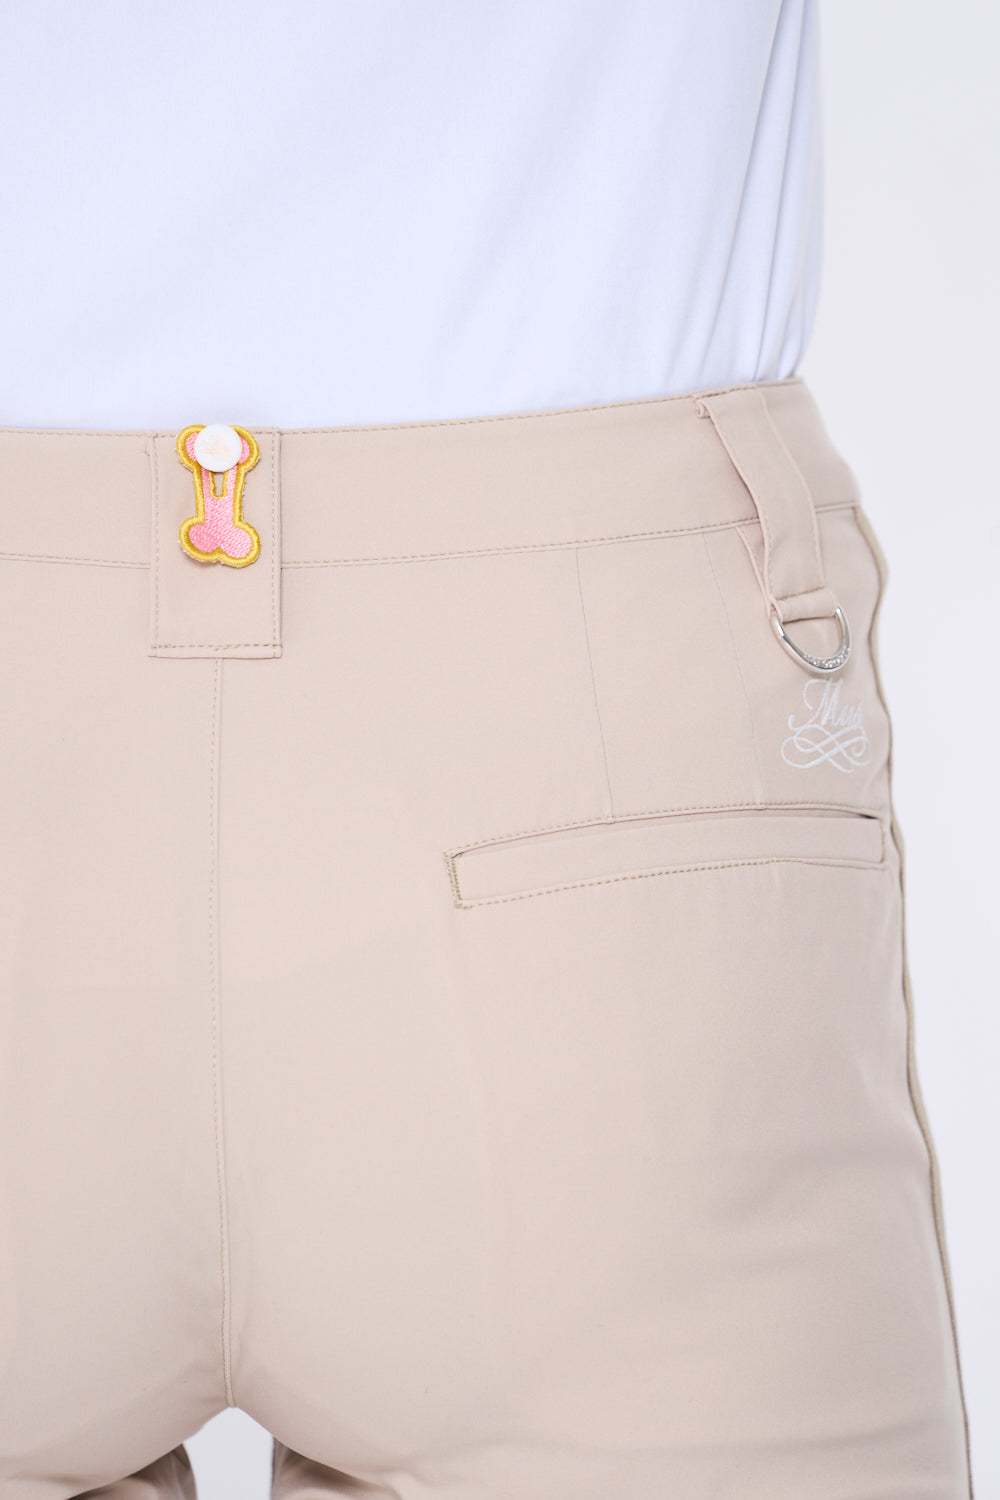 Tipard pants with UV protection (701H2504)